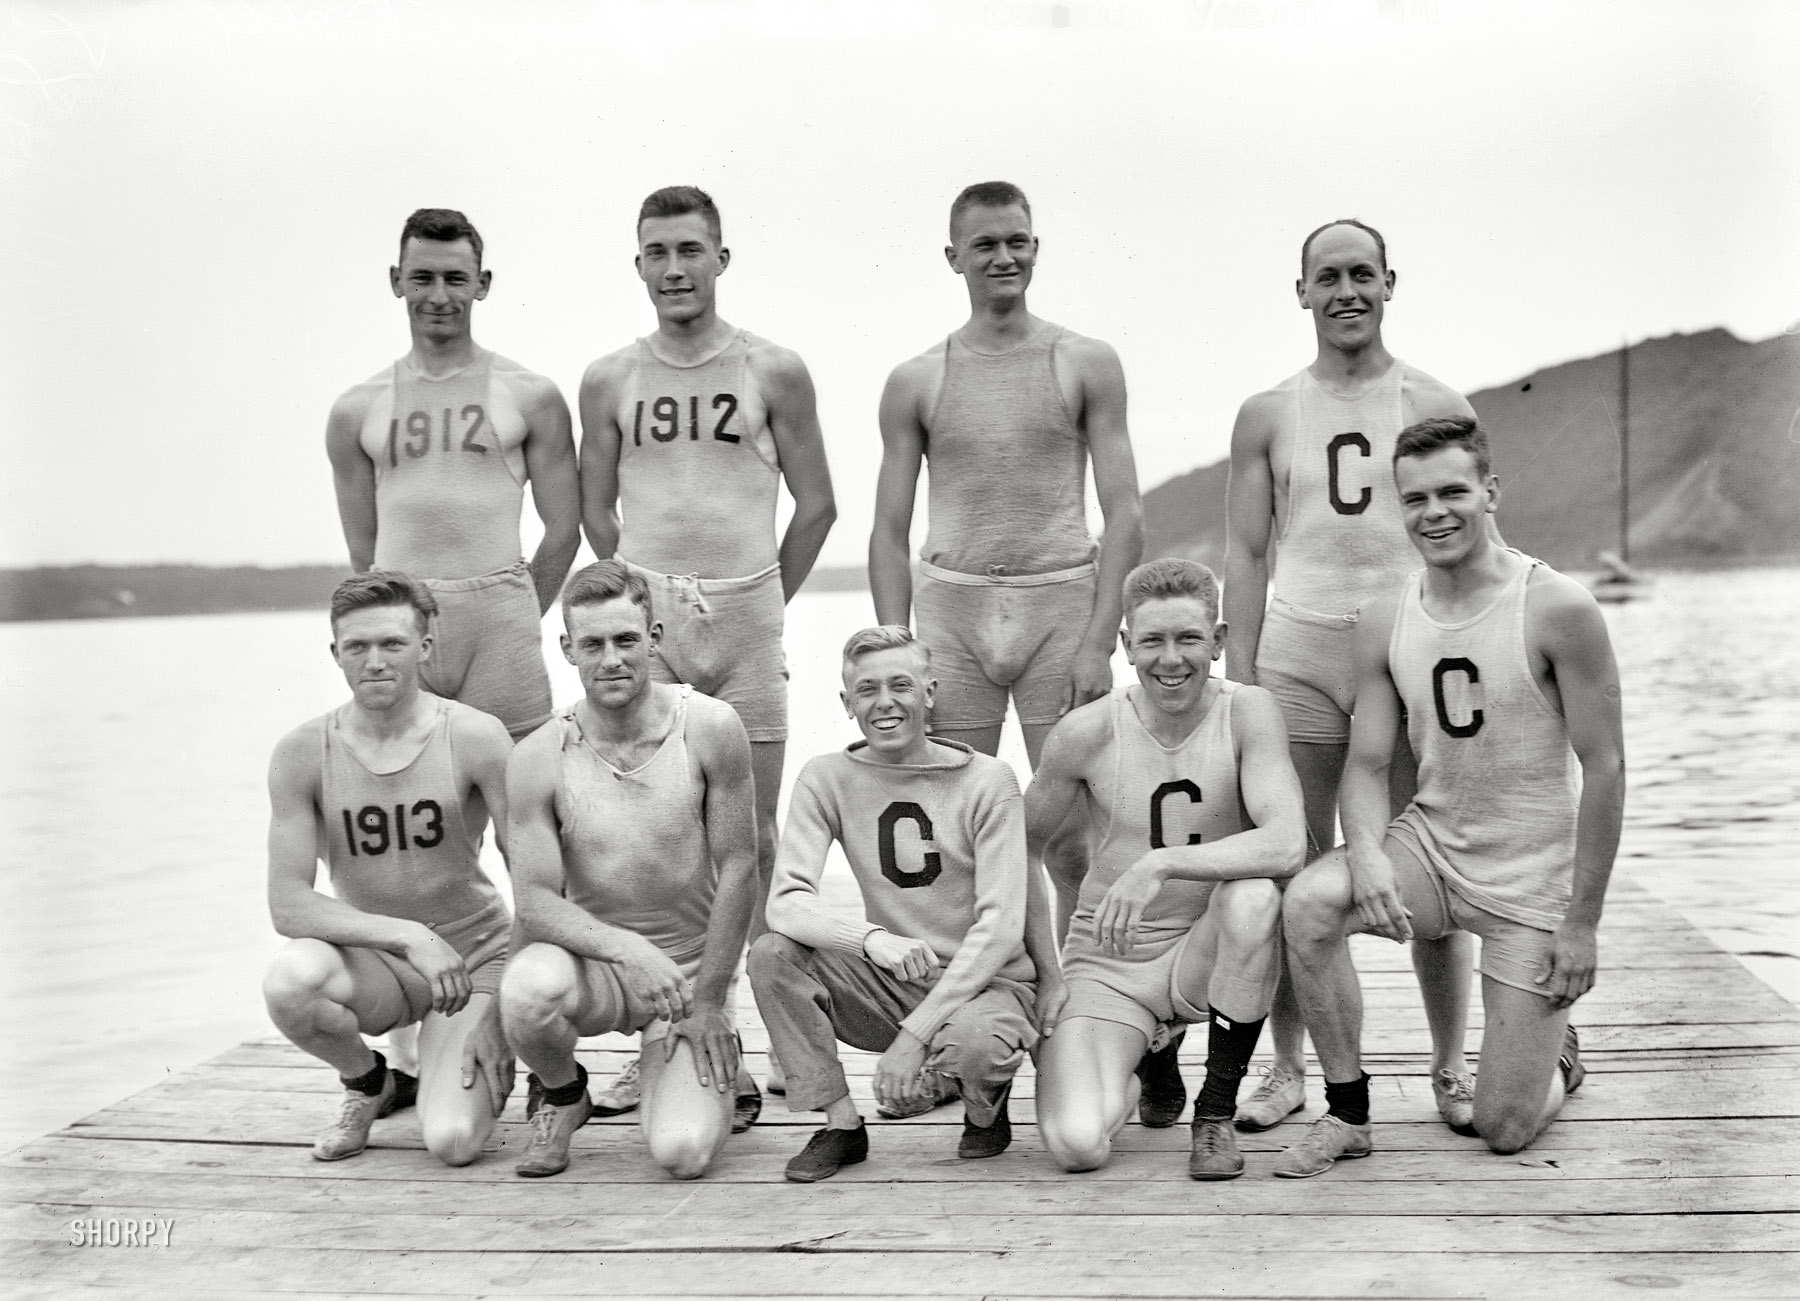 June 18, 1911. Poughkeepsie, New York. "Cornell Varsity rowers." 5x7 glass negative, George Grantham Bain Collection. View full size.